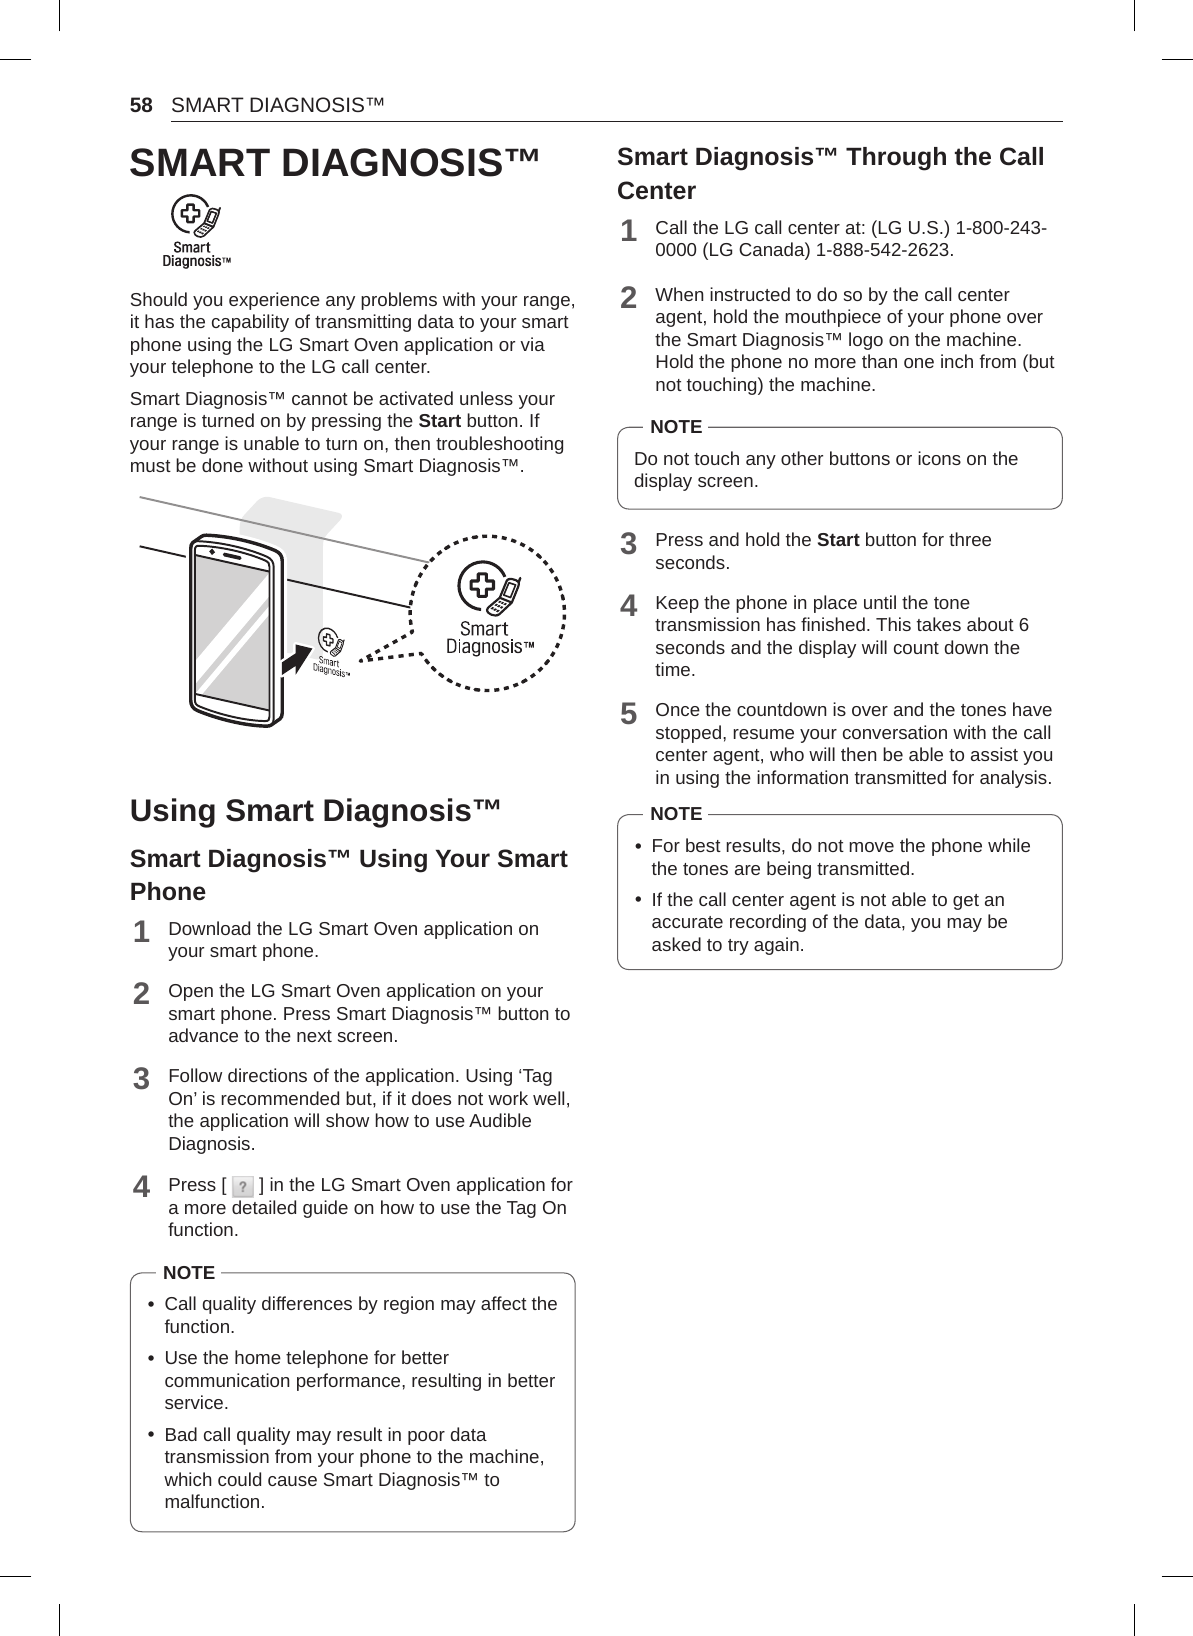 58 SMART DIAGNOSIS™SMART DIAGNOSIS™Should you experience any problems with your range, it has the capability of transmitting data to your smart phone using the LG Smart Oven application or via your telephone to the LG call center.Smart Diagnosis™ cannot be activated unless your range is turned on by pressing the Start button. If your range is unable to turn on, then troubleshooting must be done without using Smart Diagnosis™.Using Smart Diagnosis™Smart Diagnosis™ Using Your Smart Phone1Download the LG Smart Oven application on your smart phone.2Open the LG Smart Oven application on your smart phone. Press Smart Diagnosis™ button to advance to the next screen.3Follow directions of the application. Using ‘Tag On’ is recommended but, if it does not work well, the application will show how to use Audible Diagnosis.4Press [   ] in the LG Smart Oven application for a more detailed guide on how to use the Tag On function.NOTE •Call quality differences by region may affect the function. •Use the home telephone for better communication performance, resulting in better service. •Bad call quality may result in poor data transmission from your phone to the machine, which could cause Smart Diagnosis™ to malfunction.Smart Diagnosis™ Through the Call Center1Call the LG call center at: (LG U.S.) 1-800-243-0000 (LG Canada) 1-888-542-2623.2When instructed to do so by the call center agent, hold the mouthpiece of your phone over the Smart Diagnosis™ logo on the machine. Hold the phone no more than one inch from (but not touching) the machine. NOTEDo not touch any other buttons or icons on the display screen.3Press and hold the Start button for three seconds.4Keep the phone in place until the tone transmission has finished. This takes about 6 seconds and the display will count down the time.5Once the countdown is over and the tones have stopped, resume your conversation with the call center agent, who will then be able to assist you in using the information transmitted for analysis.NOTE •For best results, do not move the phone while the tones are being transmitted. •If the call center agent is not able to get an accurate recording of the data, you may be asked to try again.